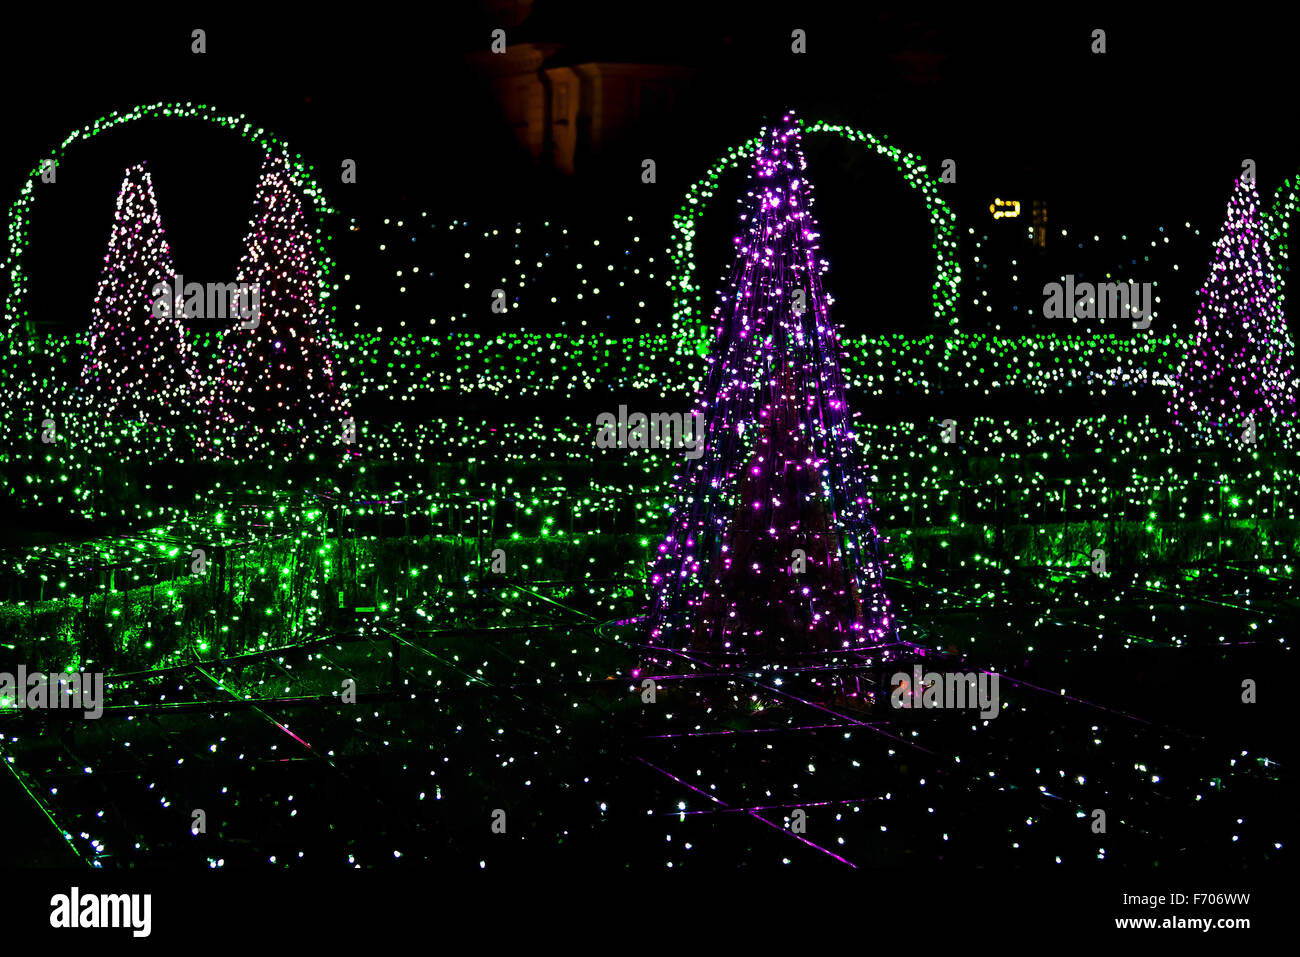 Illuminated Christmas Trees and Arches from New Year Colorful Lamps Stock Photo